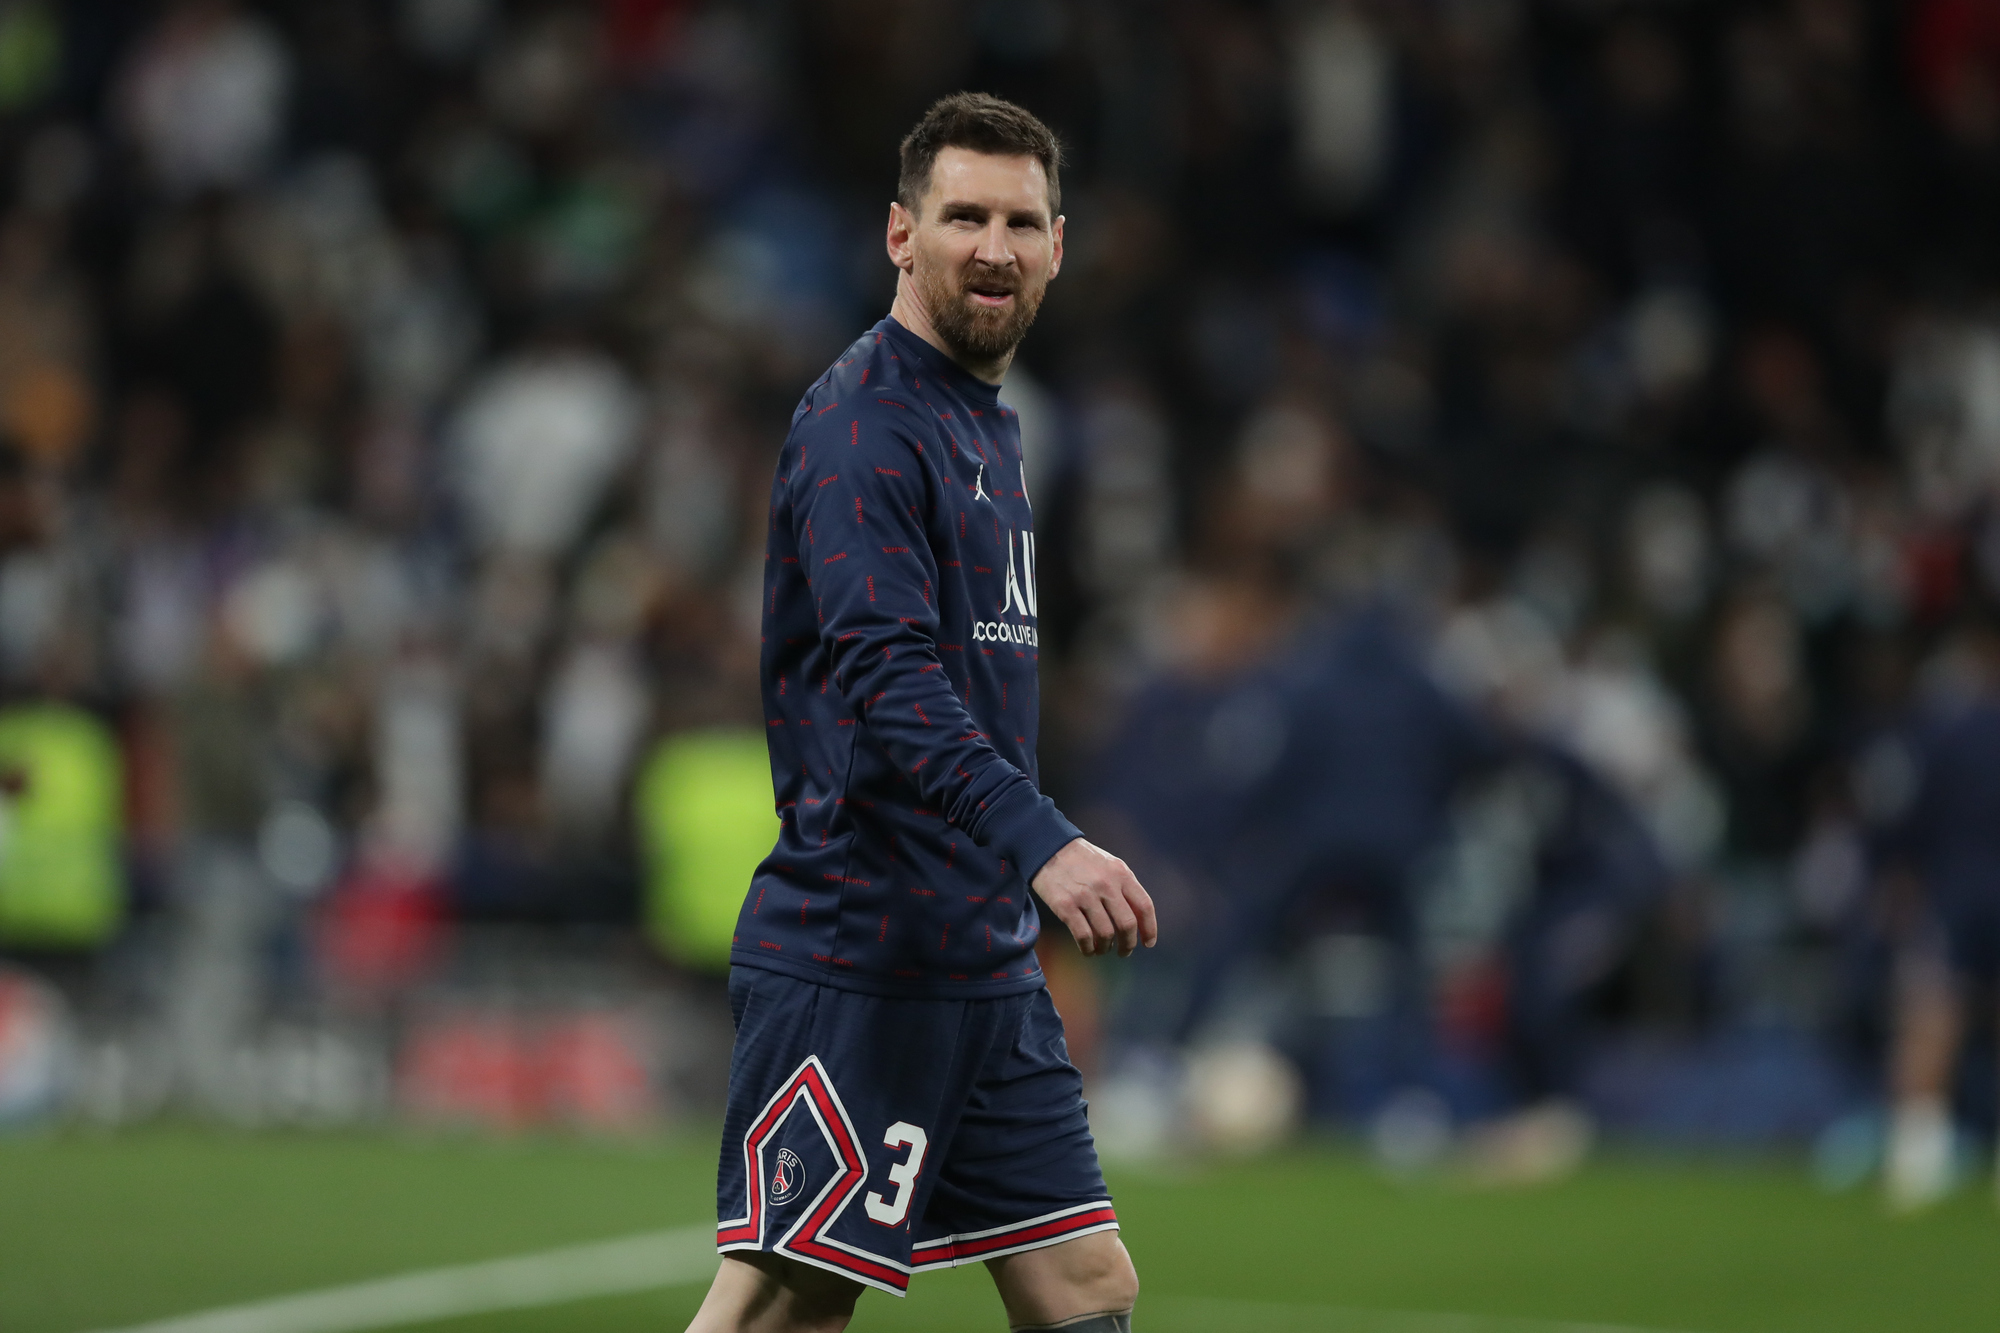 Lionel Messi had a rough first year with PSG and the fan are now booing him ... What's next for the Argentine?